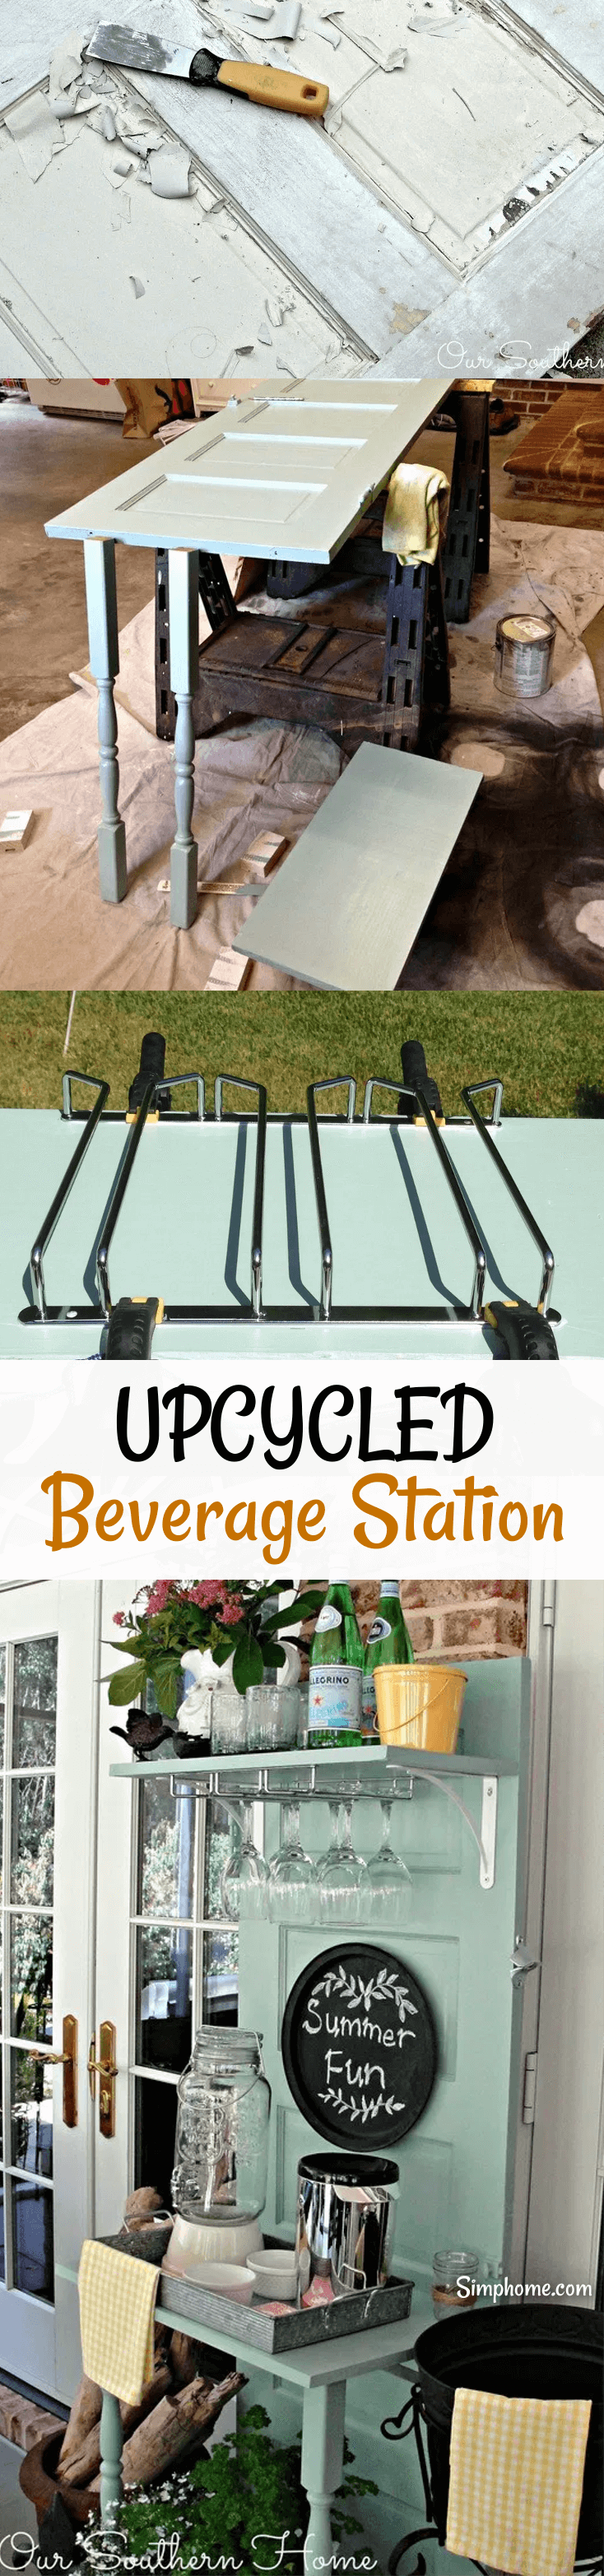 Upcycled Beverage Station 2 simphome com p